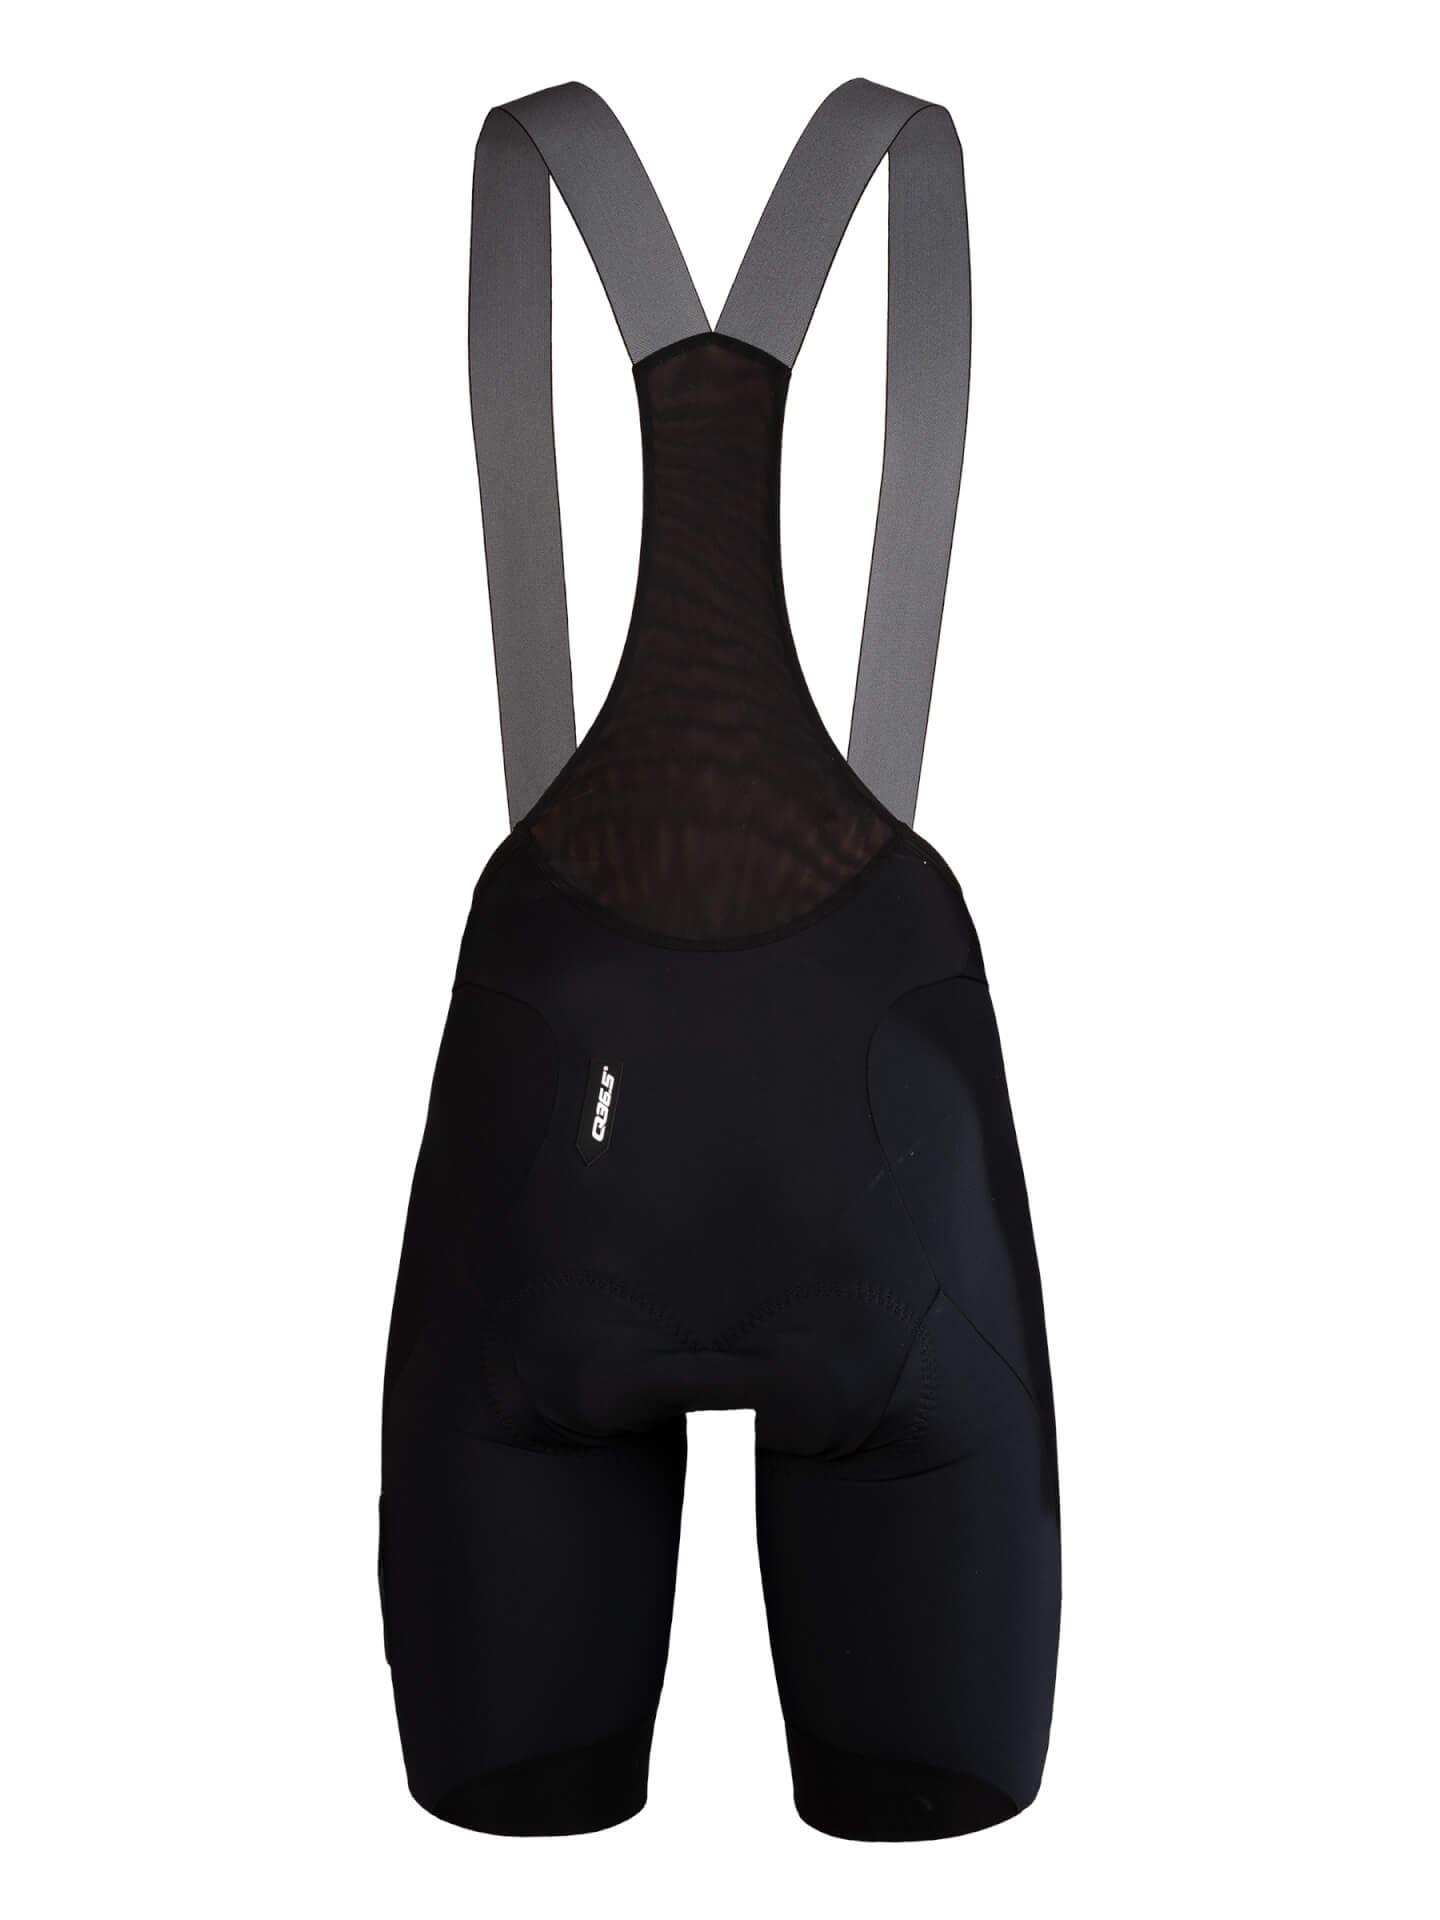 Specialized Men's RBX bib shorts review - Jersey and Bib Shorts